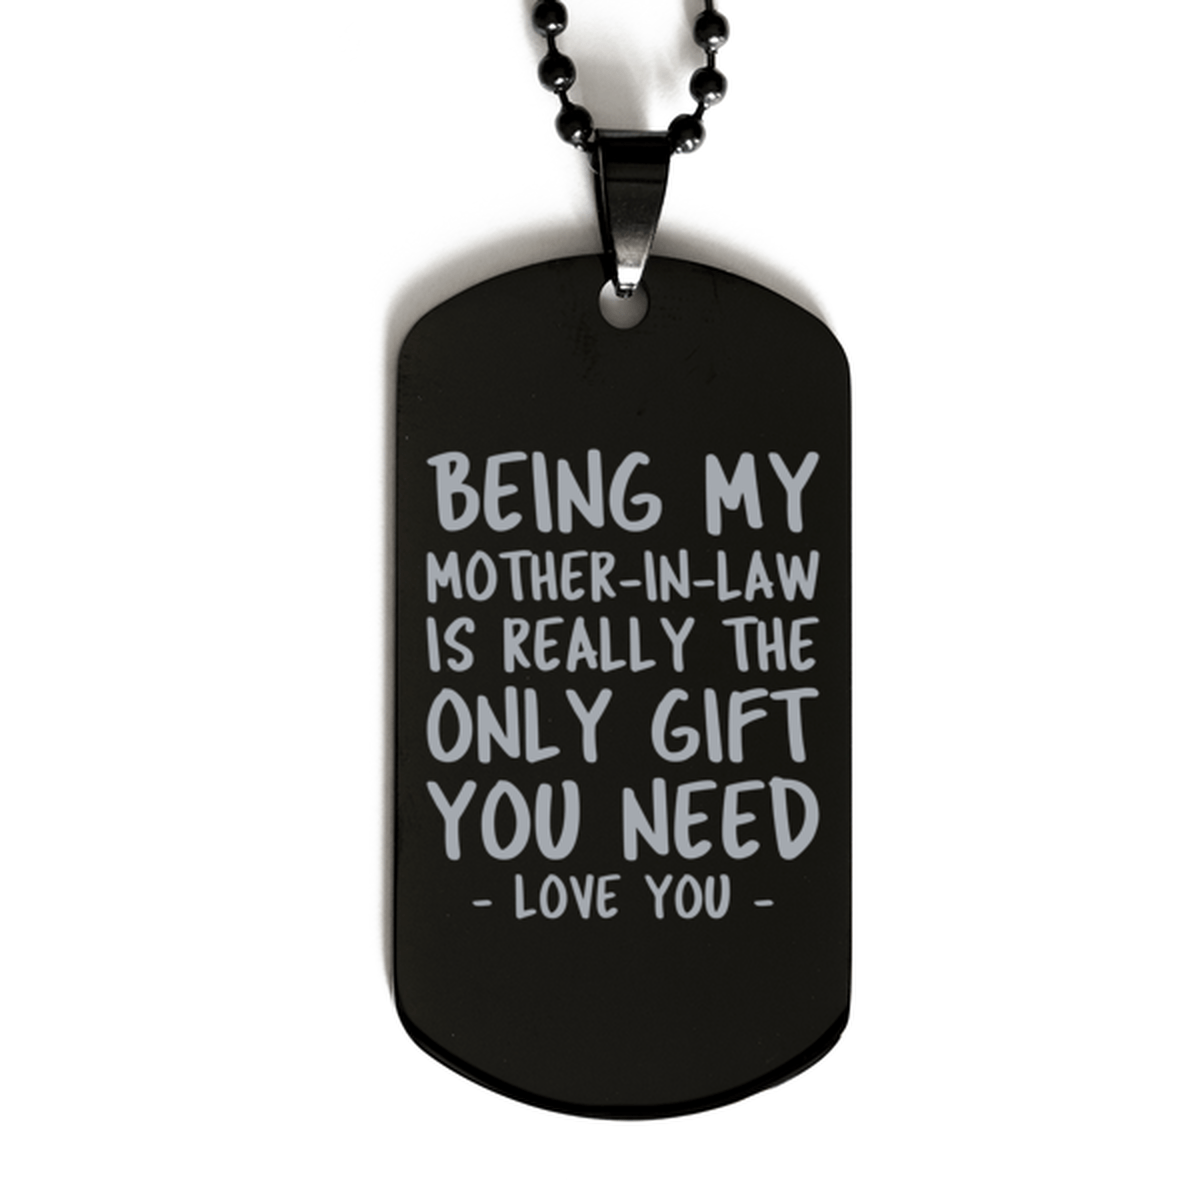 Funny Mother-in-law Black Dog Tag Necklace, Being My Mother-in-law Is Really the Only Gift You Need, Best Birthday Gifts for Mother-in-law